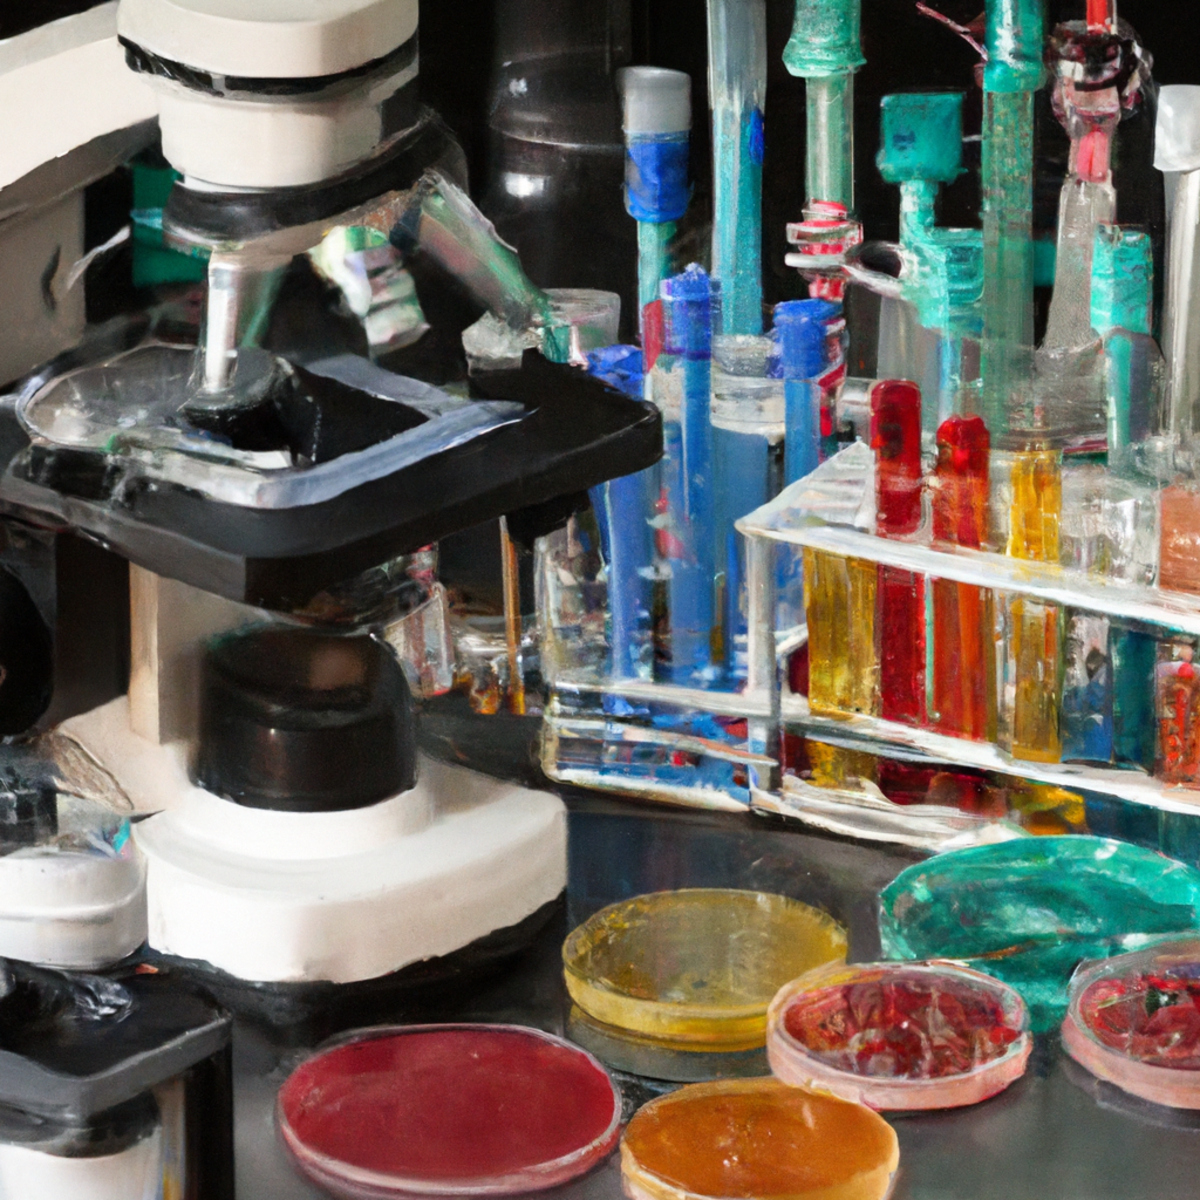 Scientific lab with equipment, test tubes, microscopes, petri dishes, literature, medical journals, and genetic diagrams for Niemann-Pick Disease research.